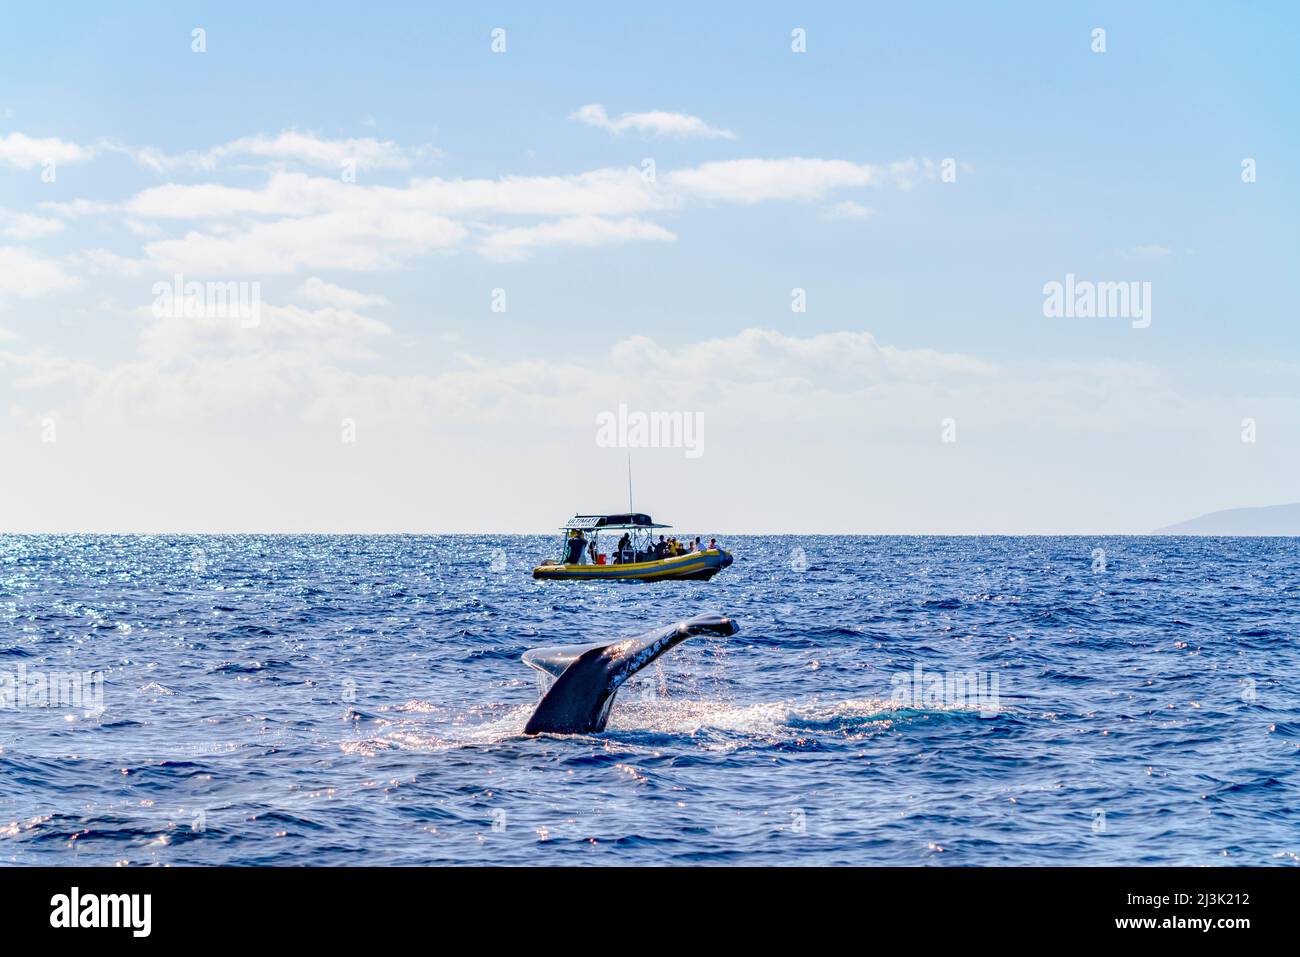 Tourists on an expedition view a whale fluke from their boat in the open ocean off the hawaiian islands; Maui, Hawaii, United States of America Stock Photo